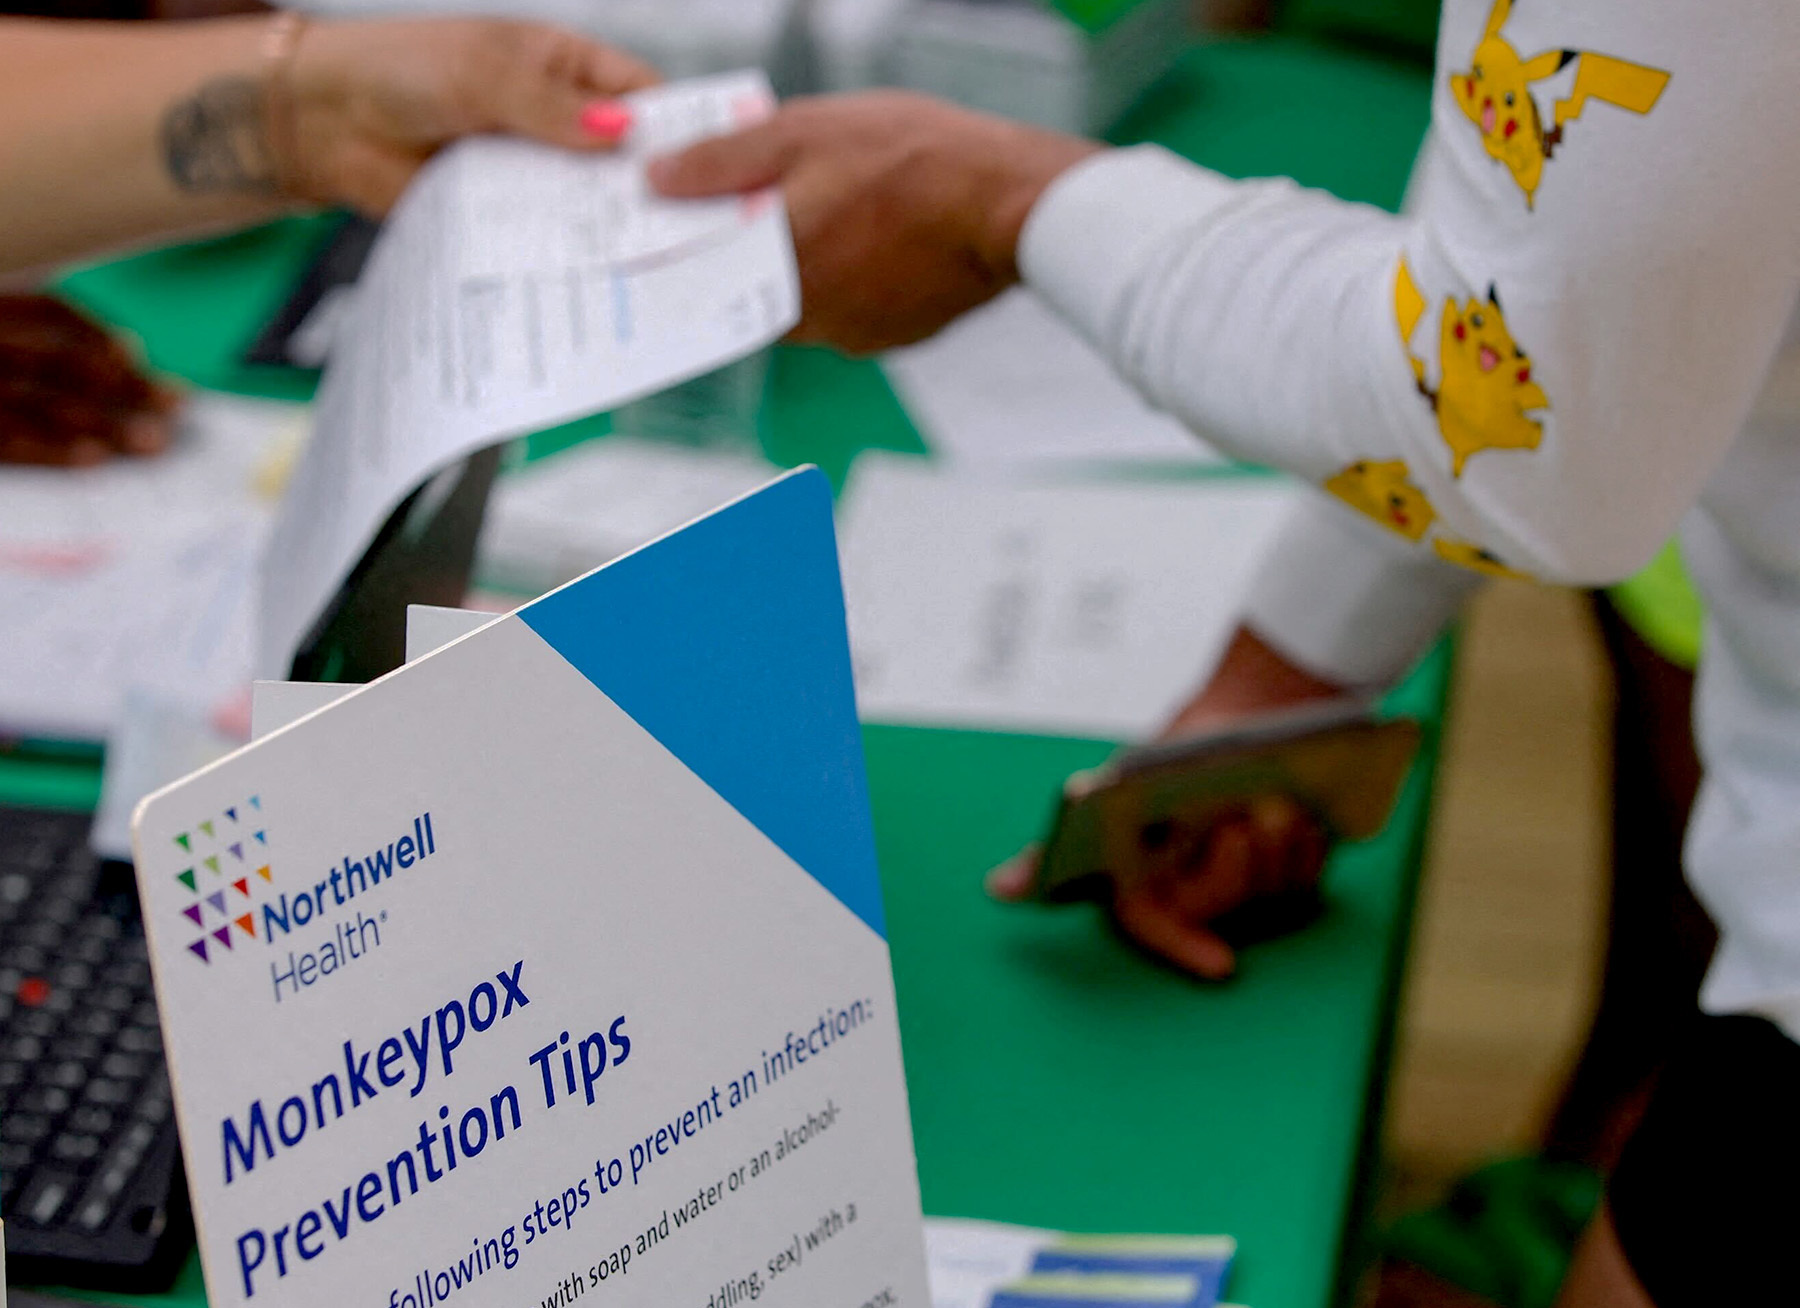 a piece of paper exchanges hands in back of a sign that say "monkeypox prevention tips"